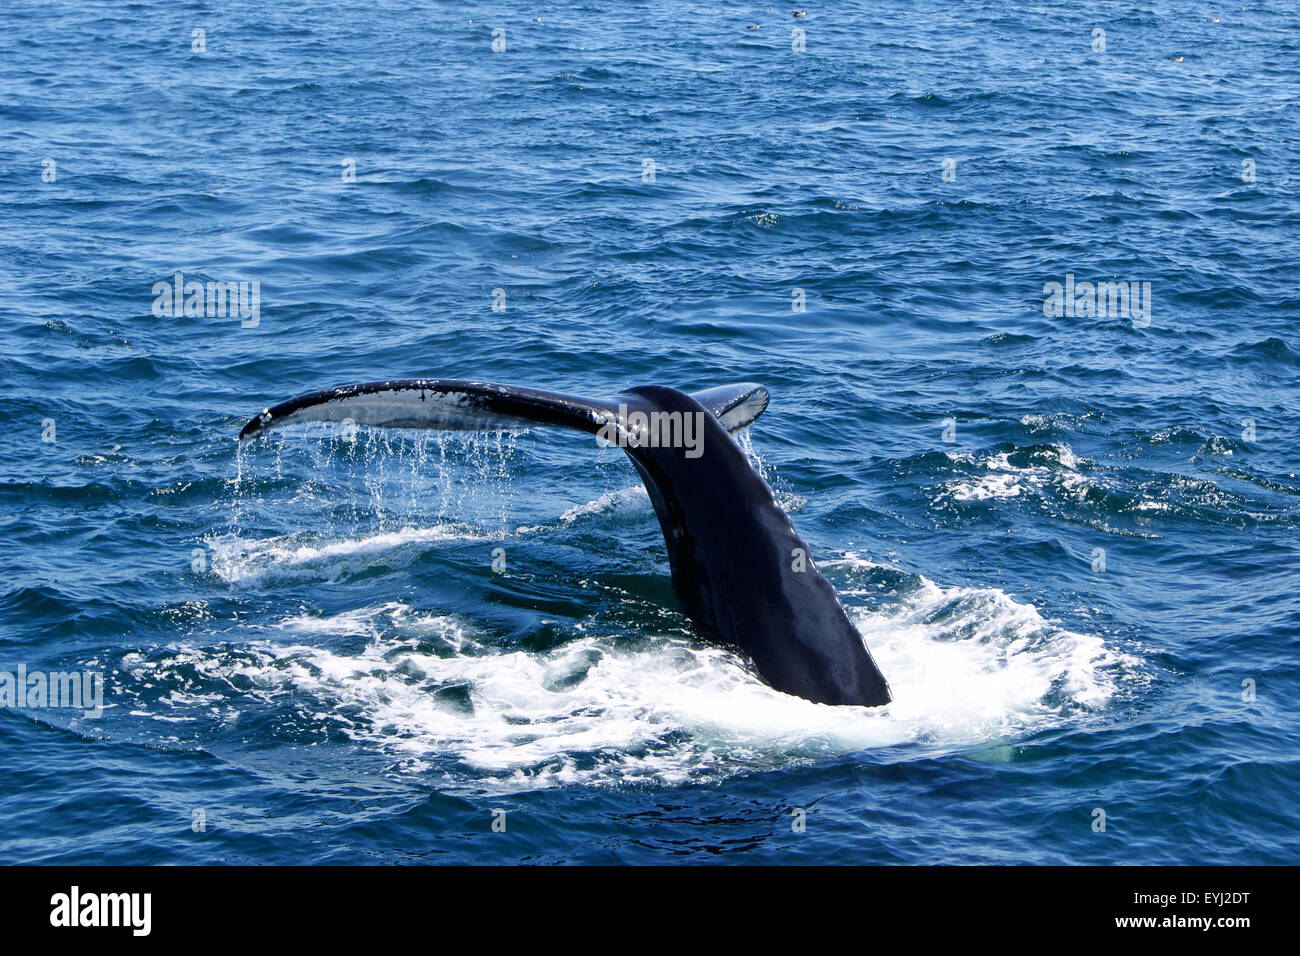 Water falls from the tail fluke of a humpback whale as the whale starts to dive. Stock Photo